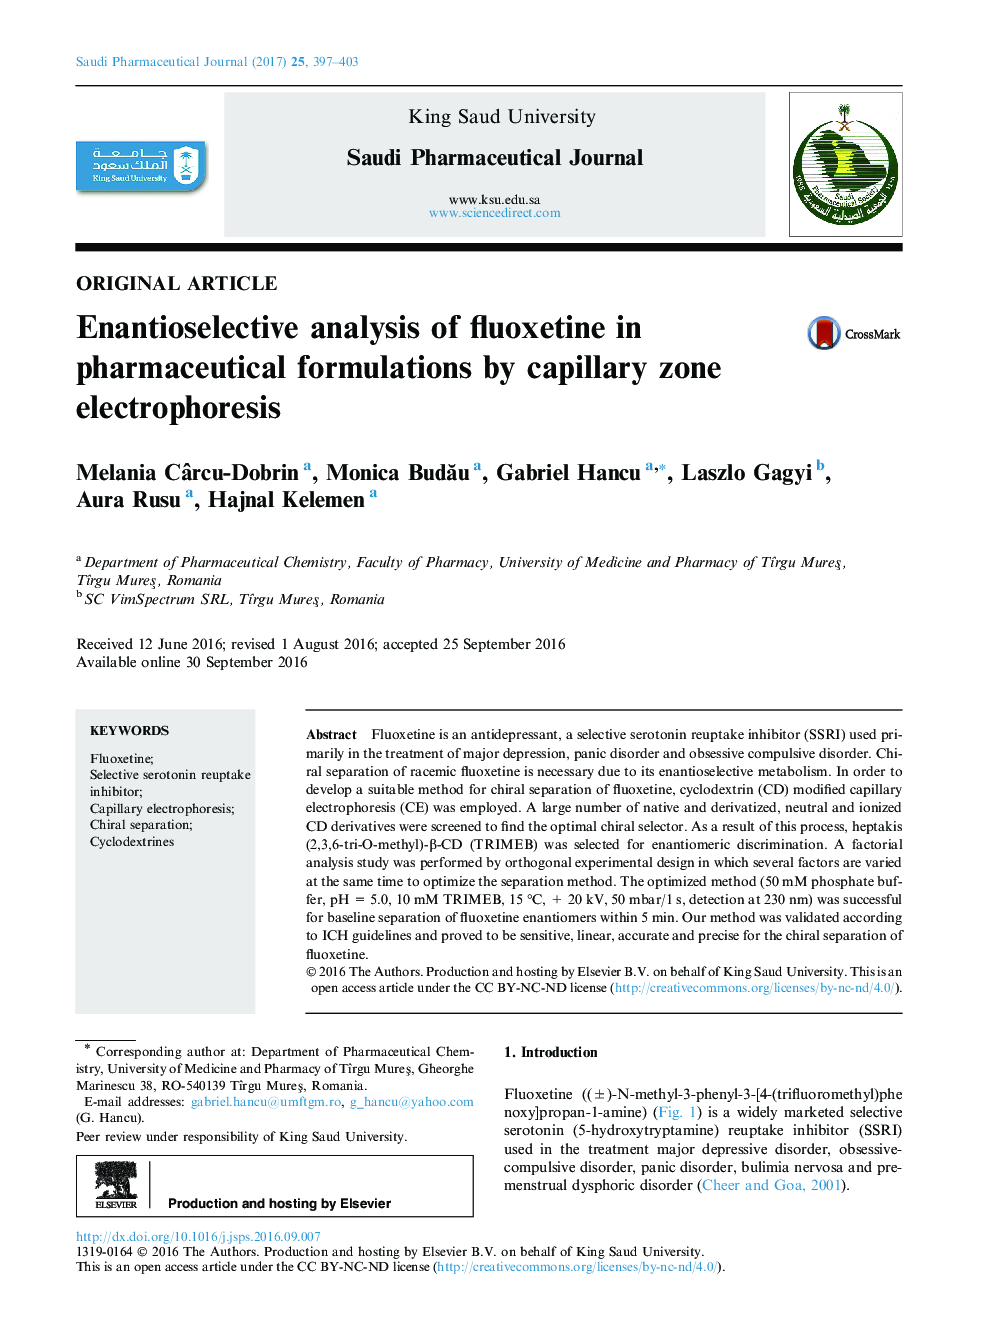 Enantioselective analysis of fluoxetine in pharmaceutical formulations by capillary zone electrophoresis